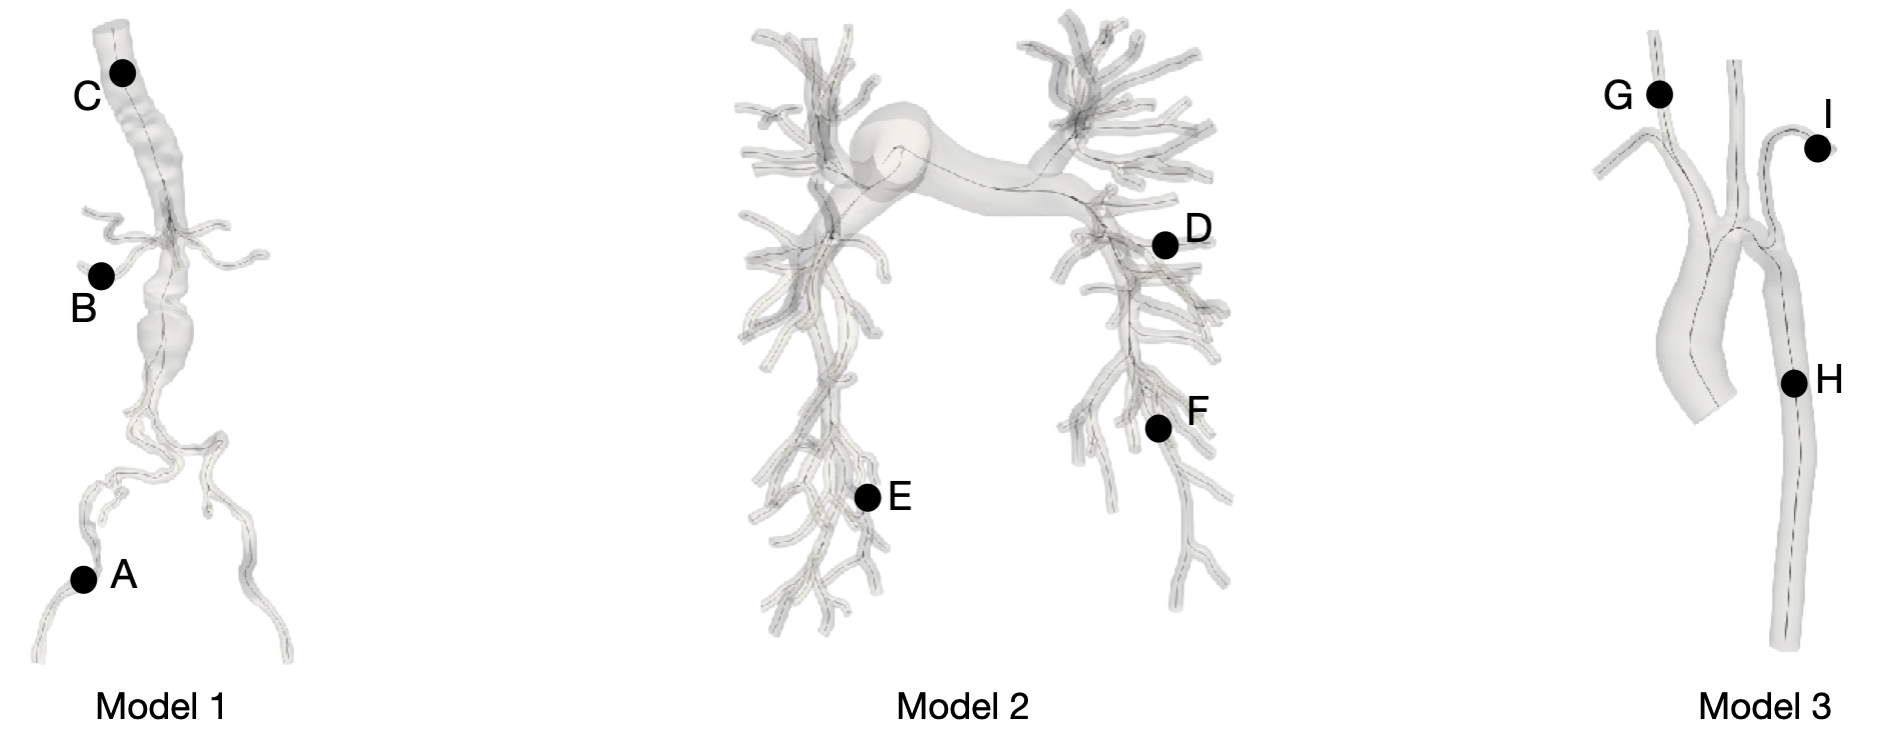 Model 1 shows aortofemoral model affected by an aneurysm. Model 2 shows a healthy pulmonary model. Model 3 shows an aorta model affected by coarctation.